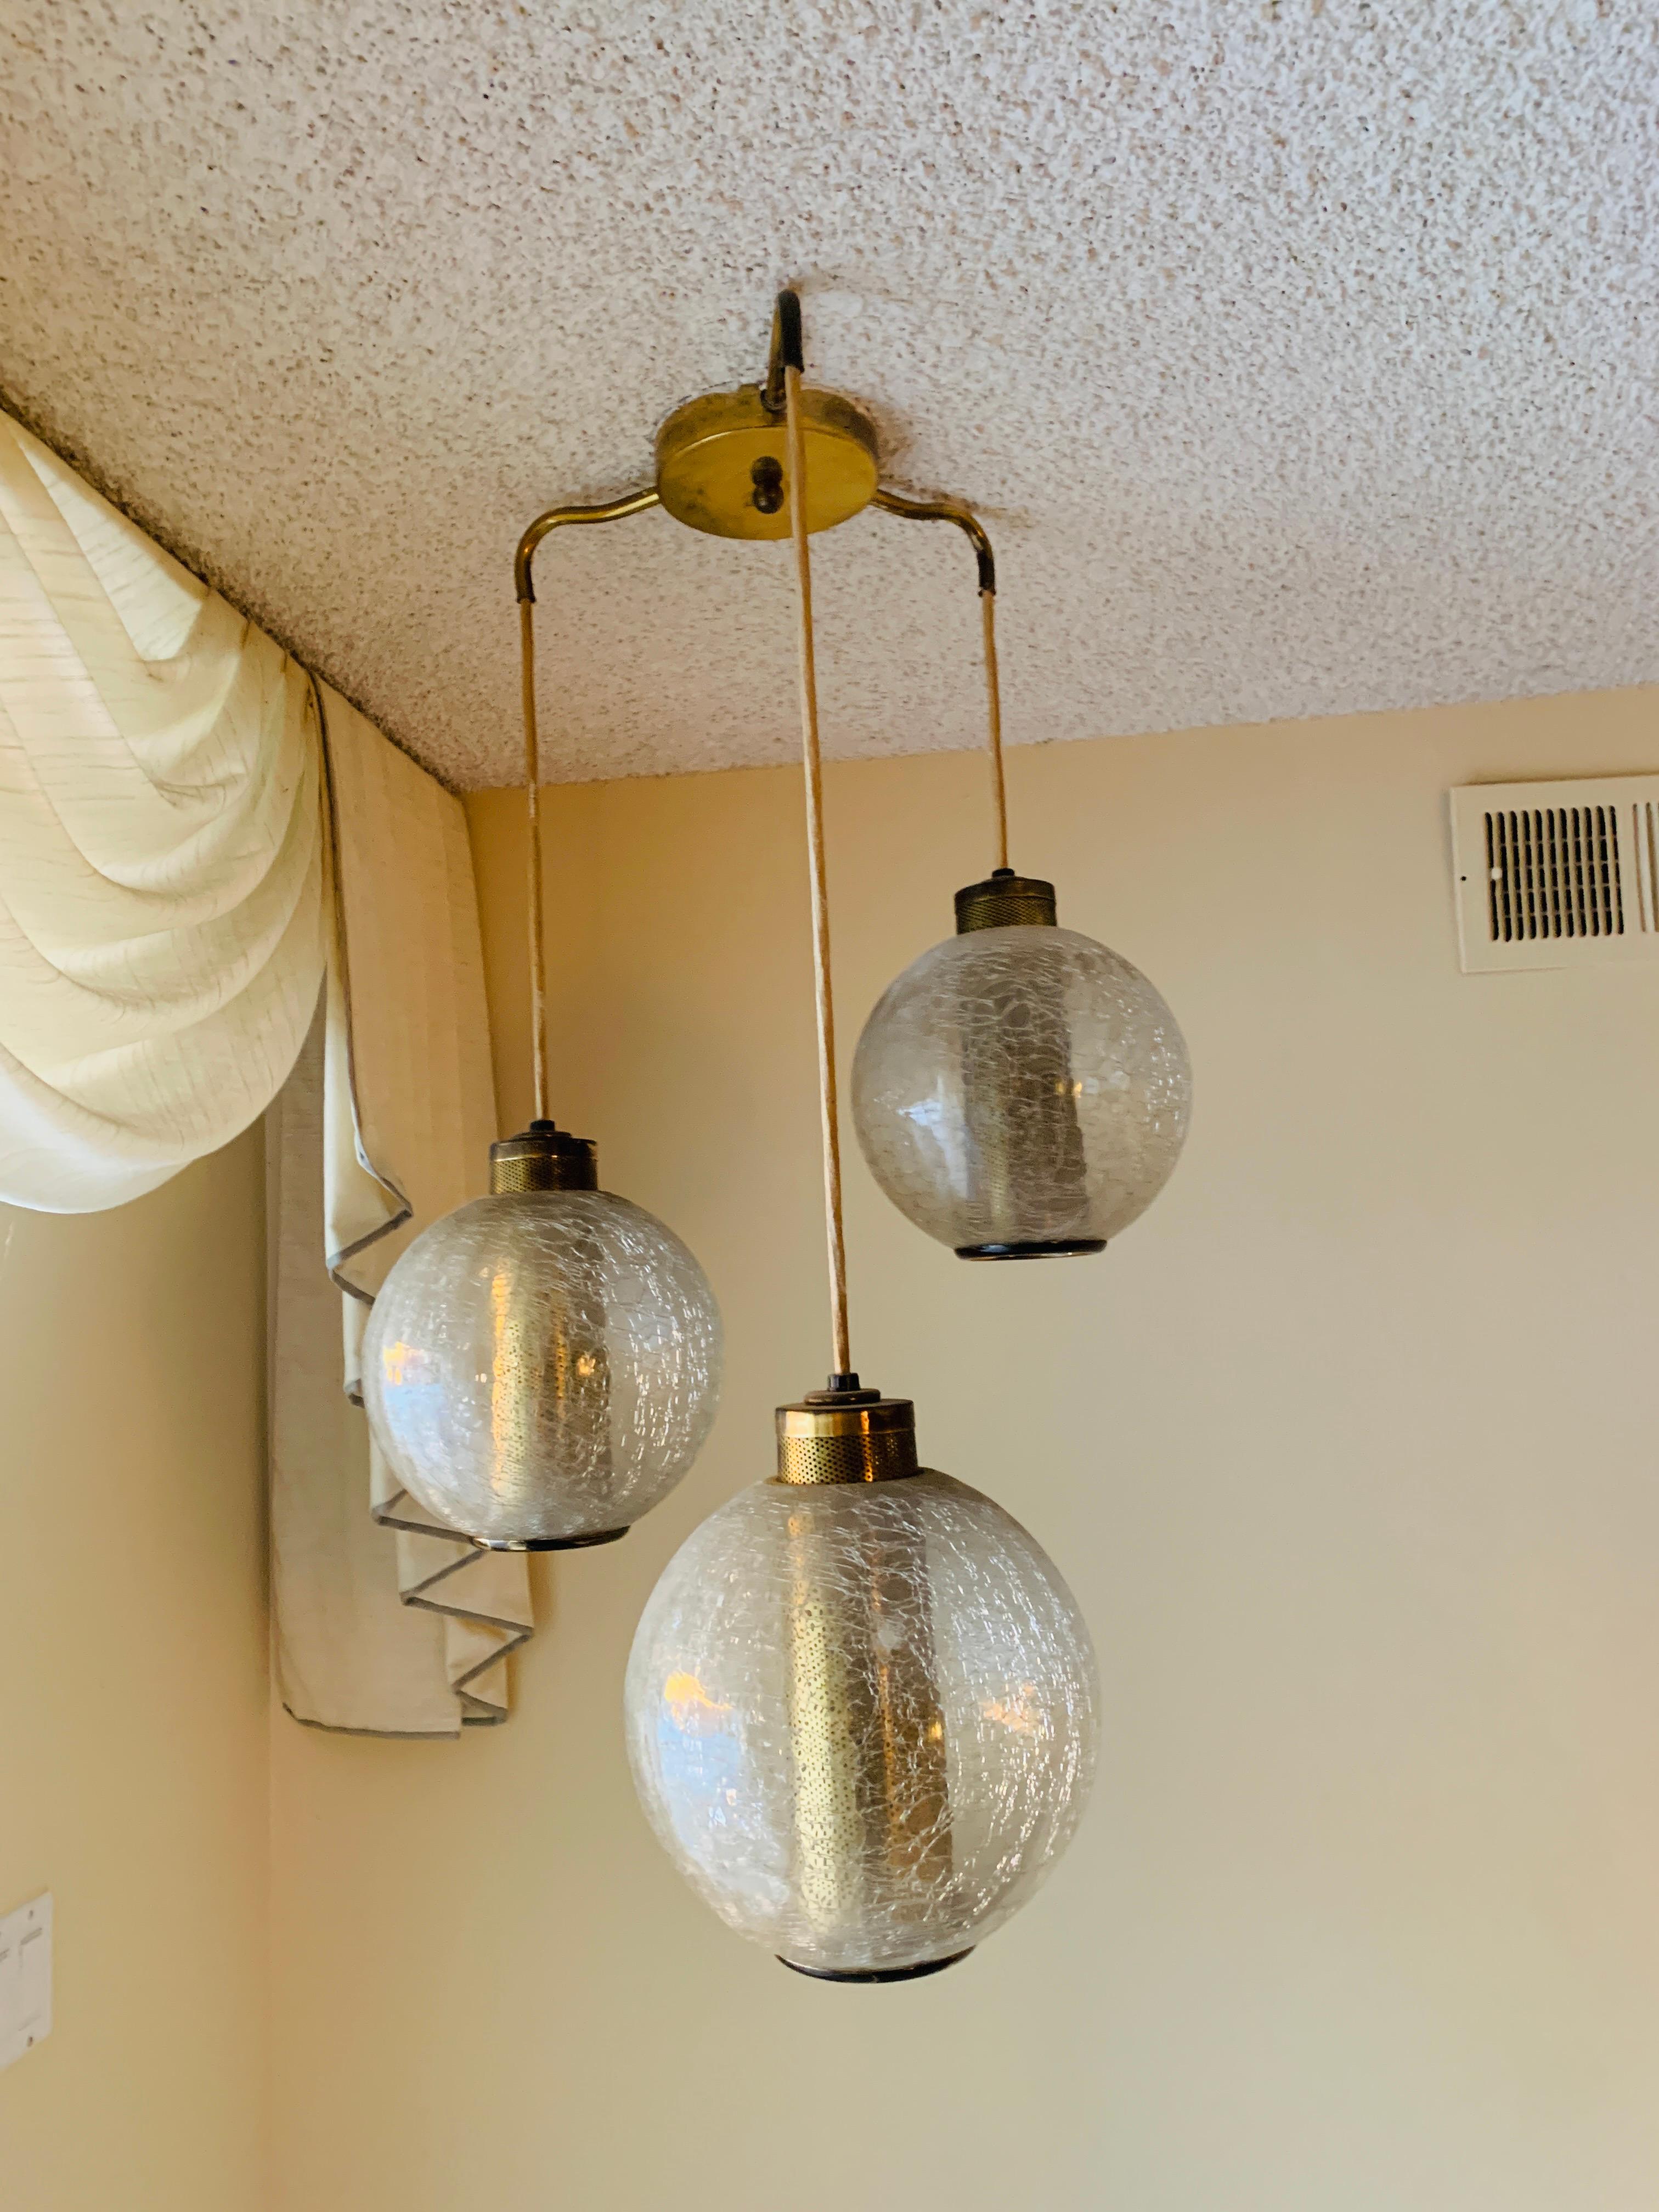 Beautiful pendant/chandelier in crackled glass and brass. The piece is from the 1960s or 1970s and is in excellent condition, one owner and at the same house since purchased. Fully functional.

Measurements:
36 inches high (lowest glove x 23